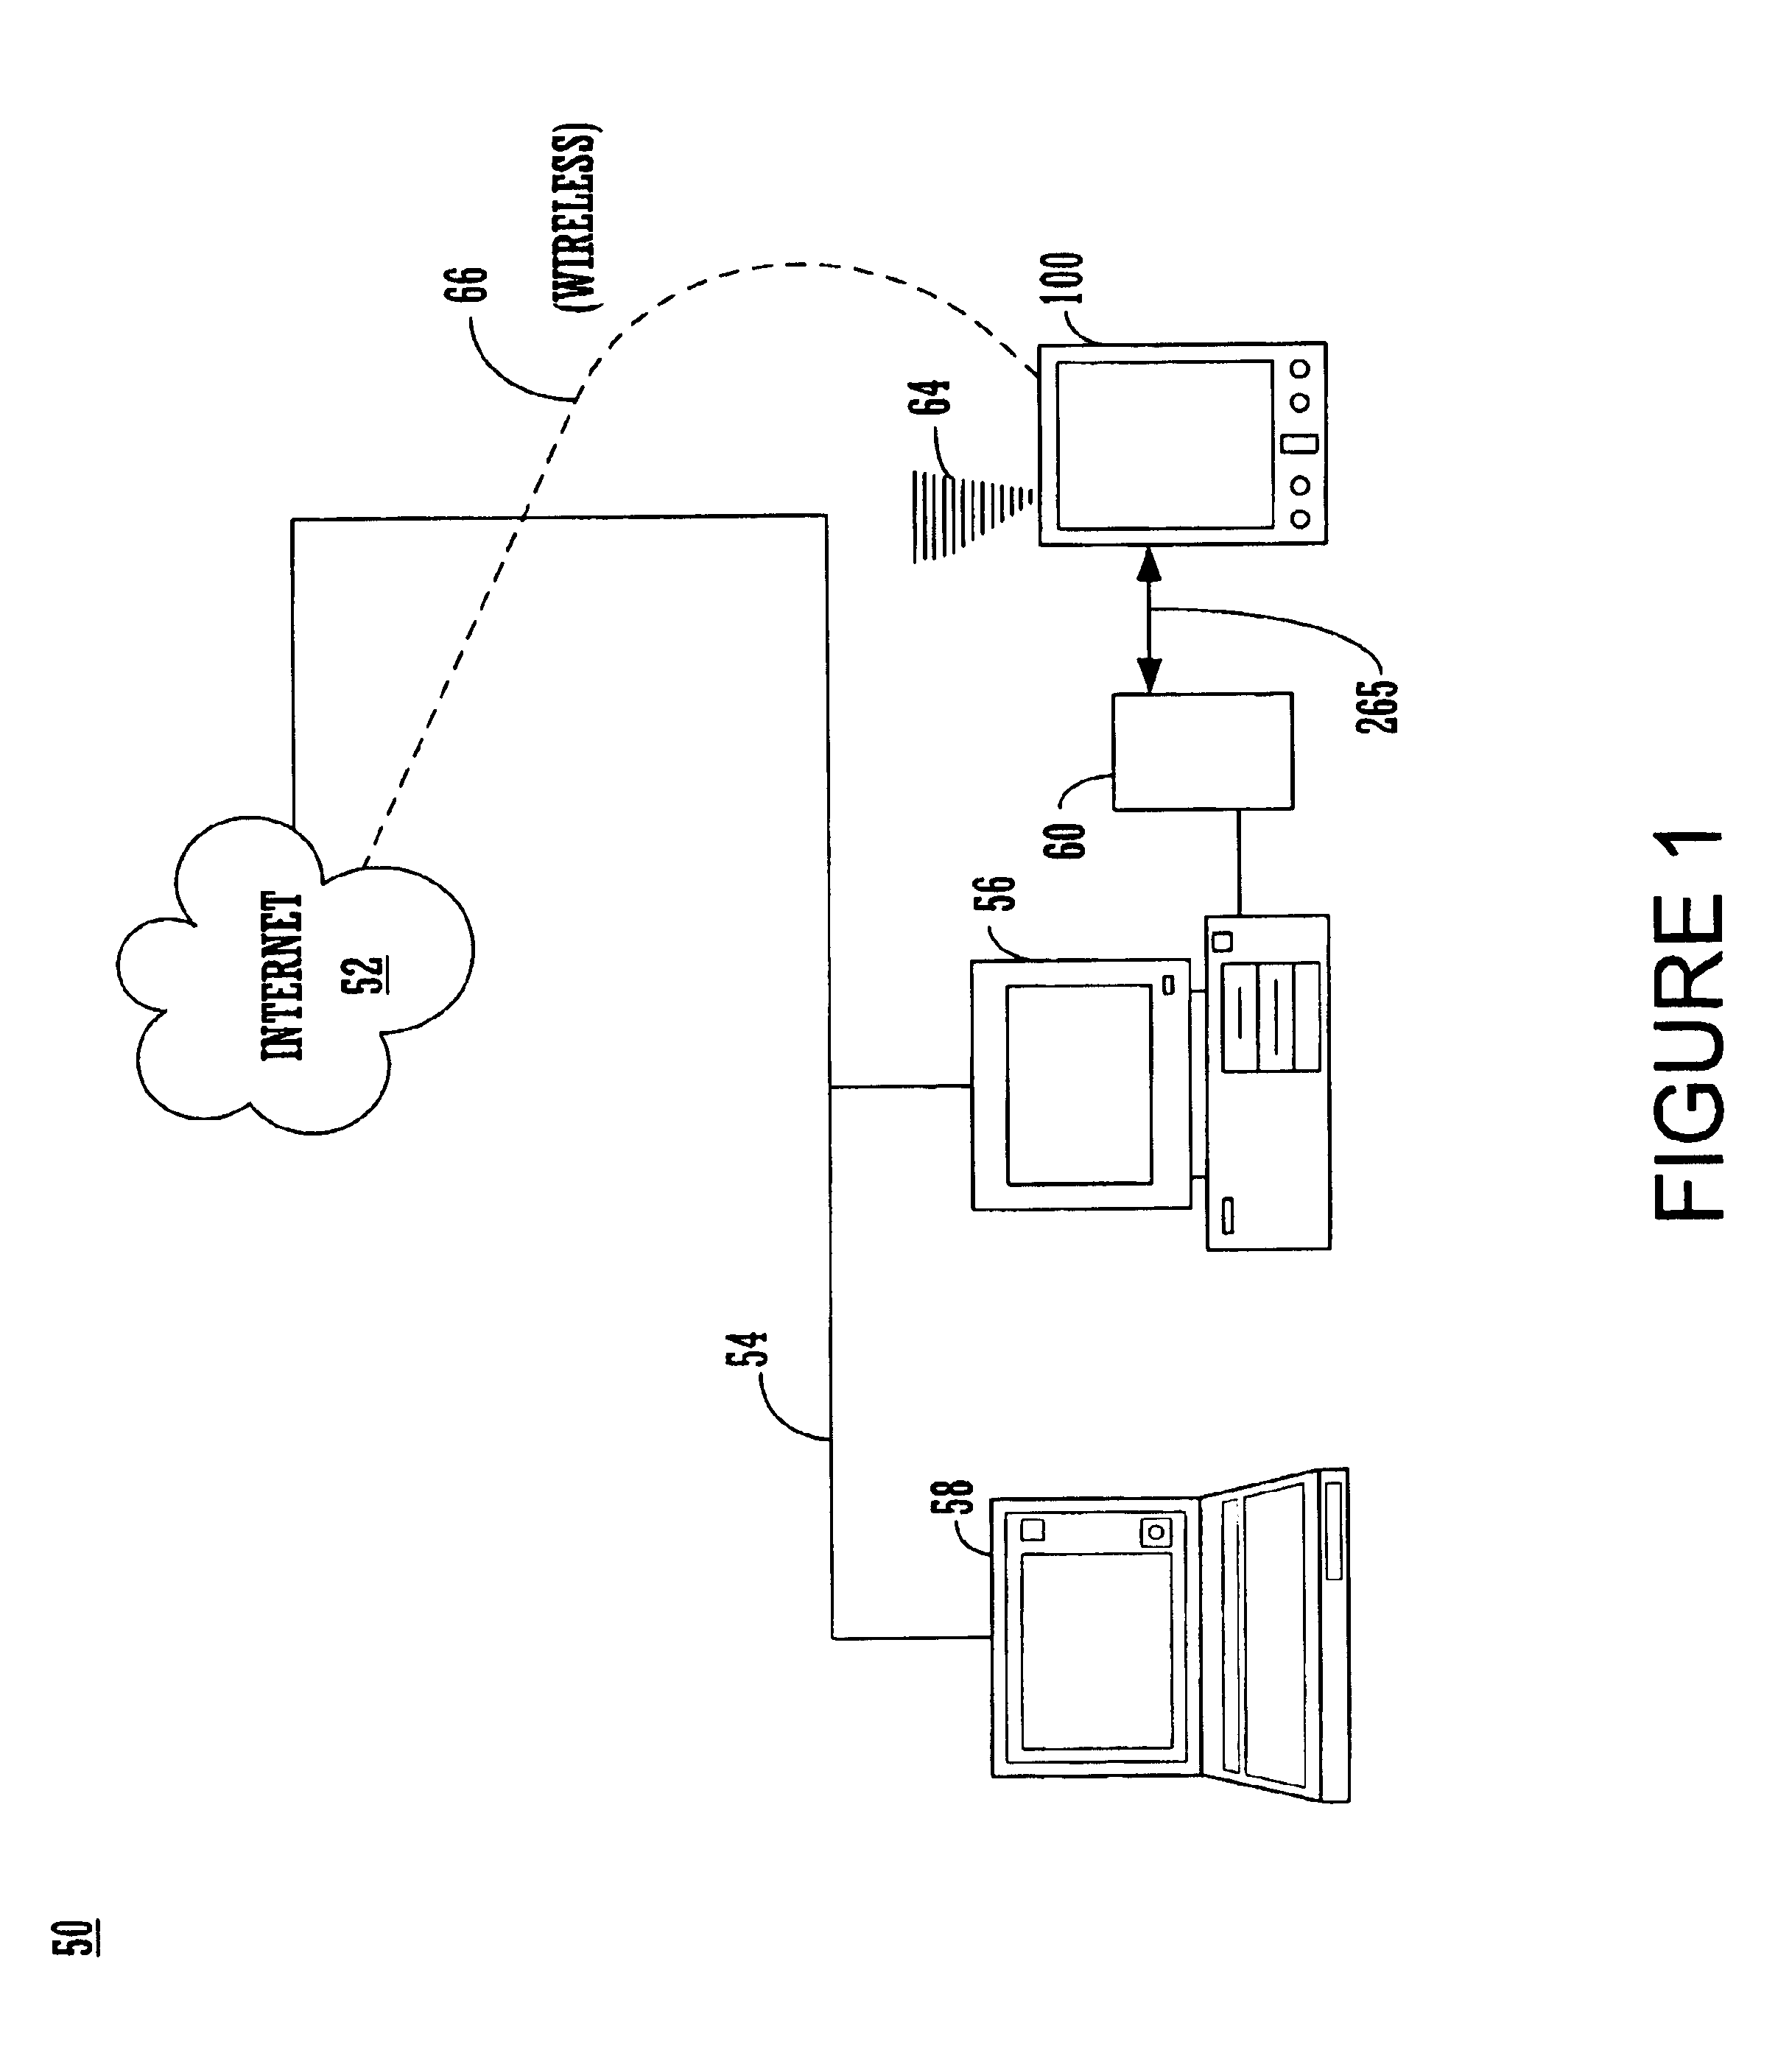 Method and system for implementing URL scheme proxies on a computer system